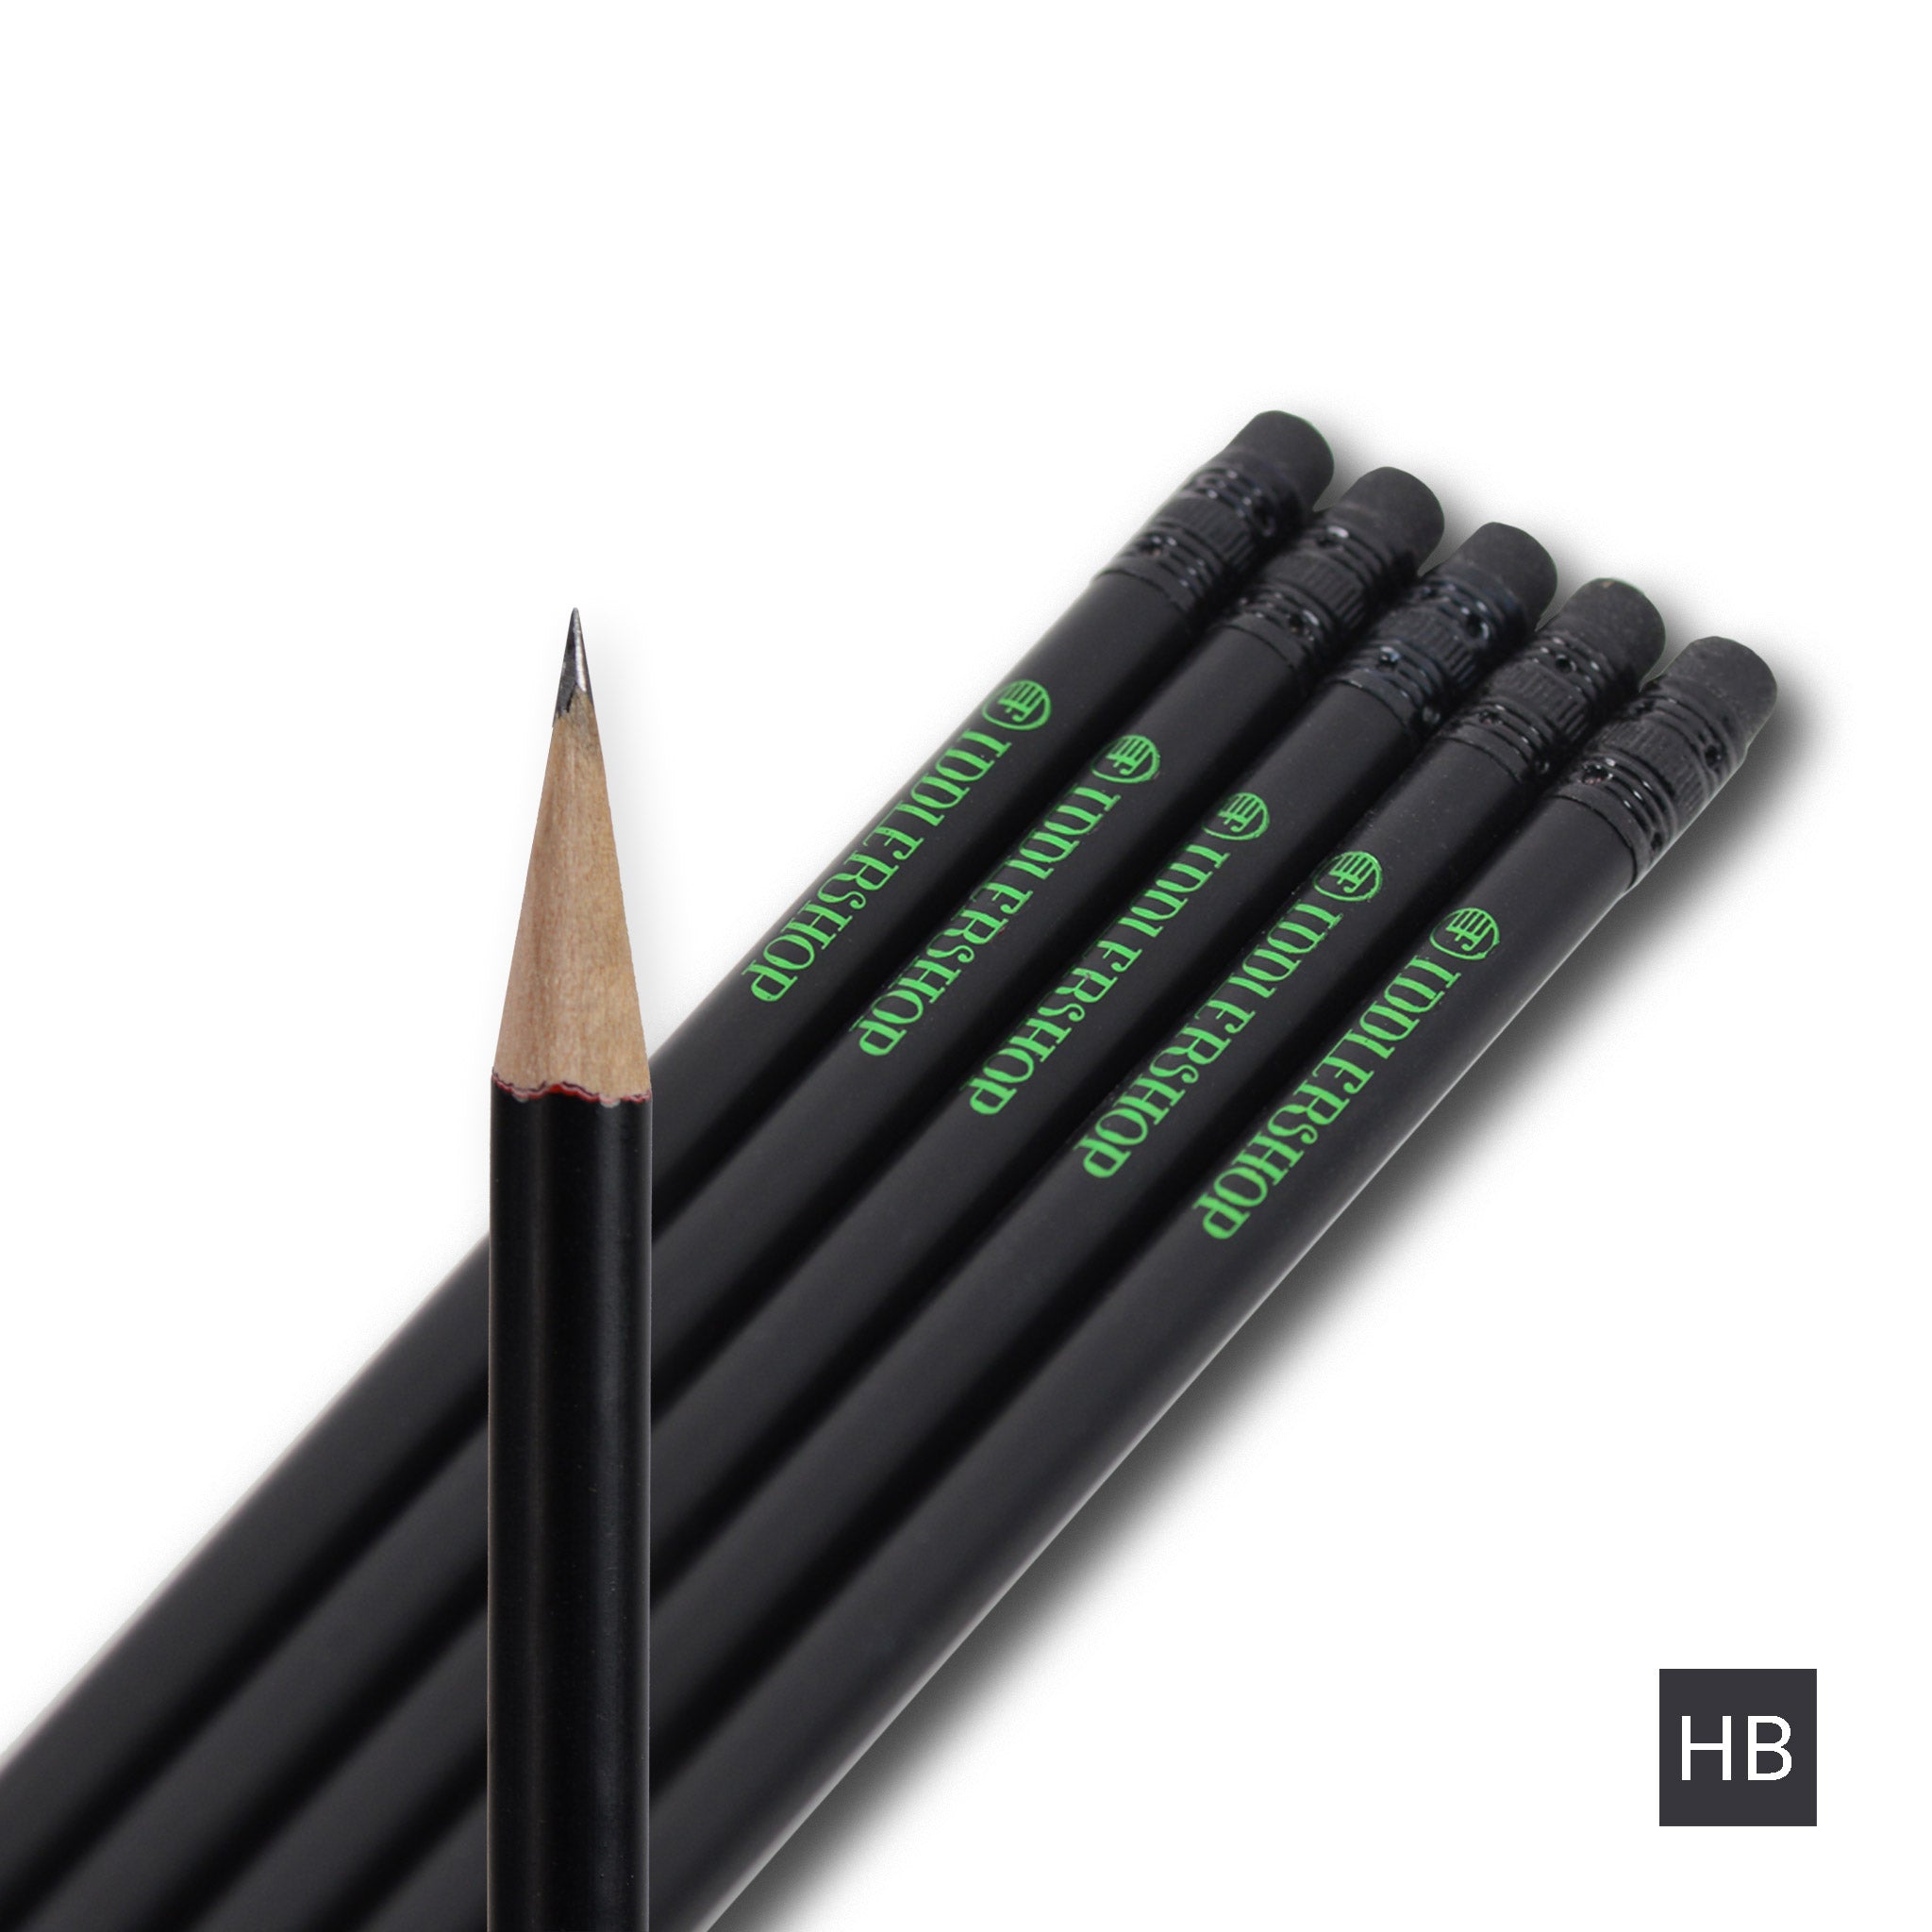 Orchestra Pencils HB 5-Pack